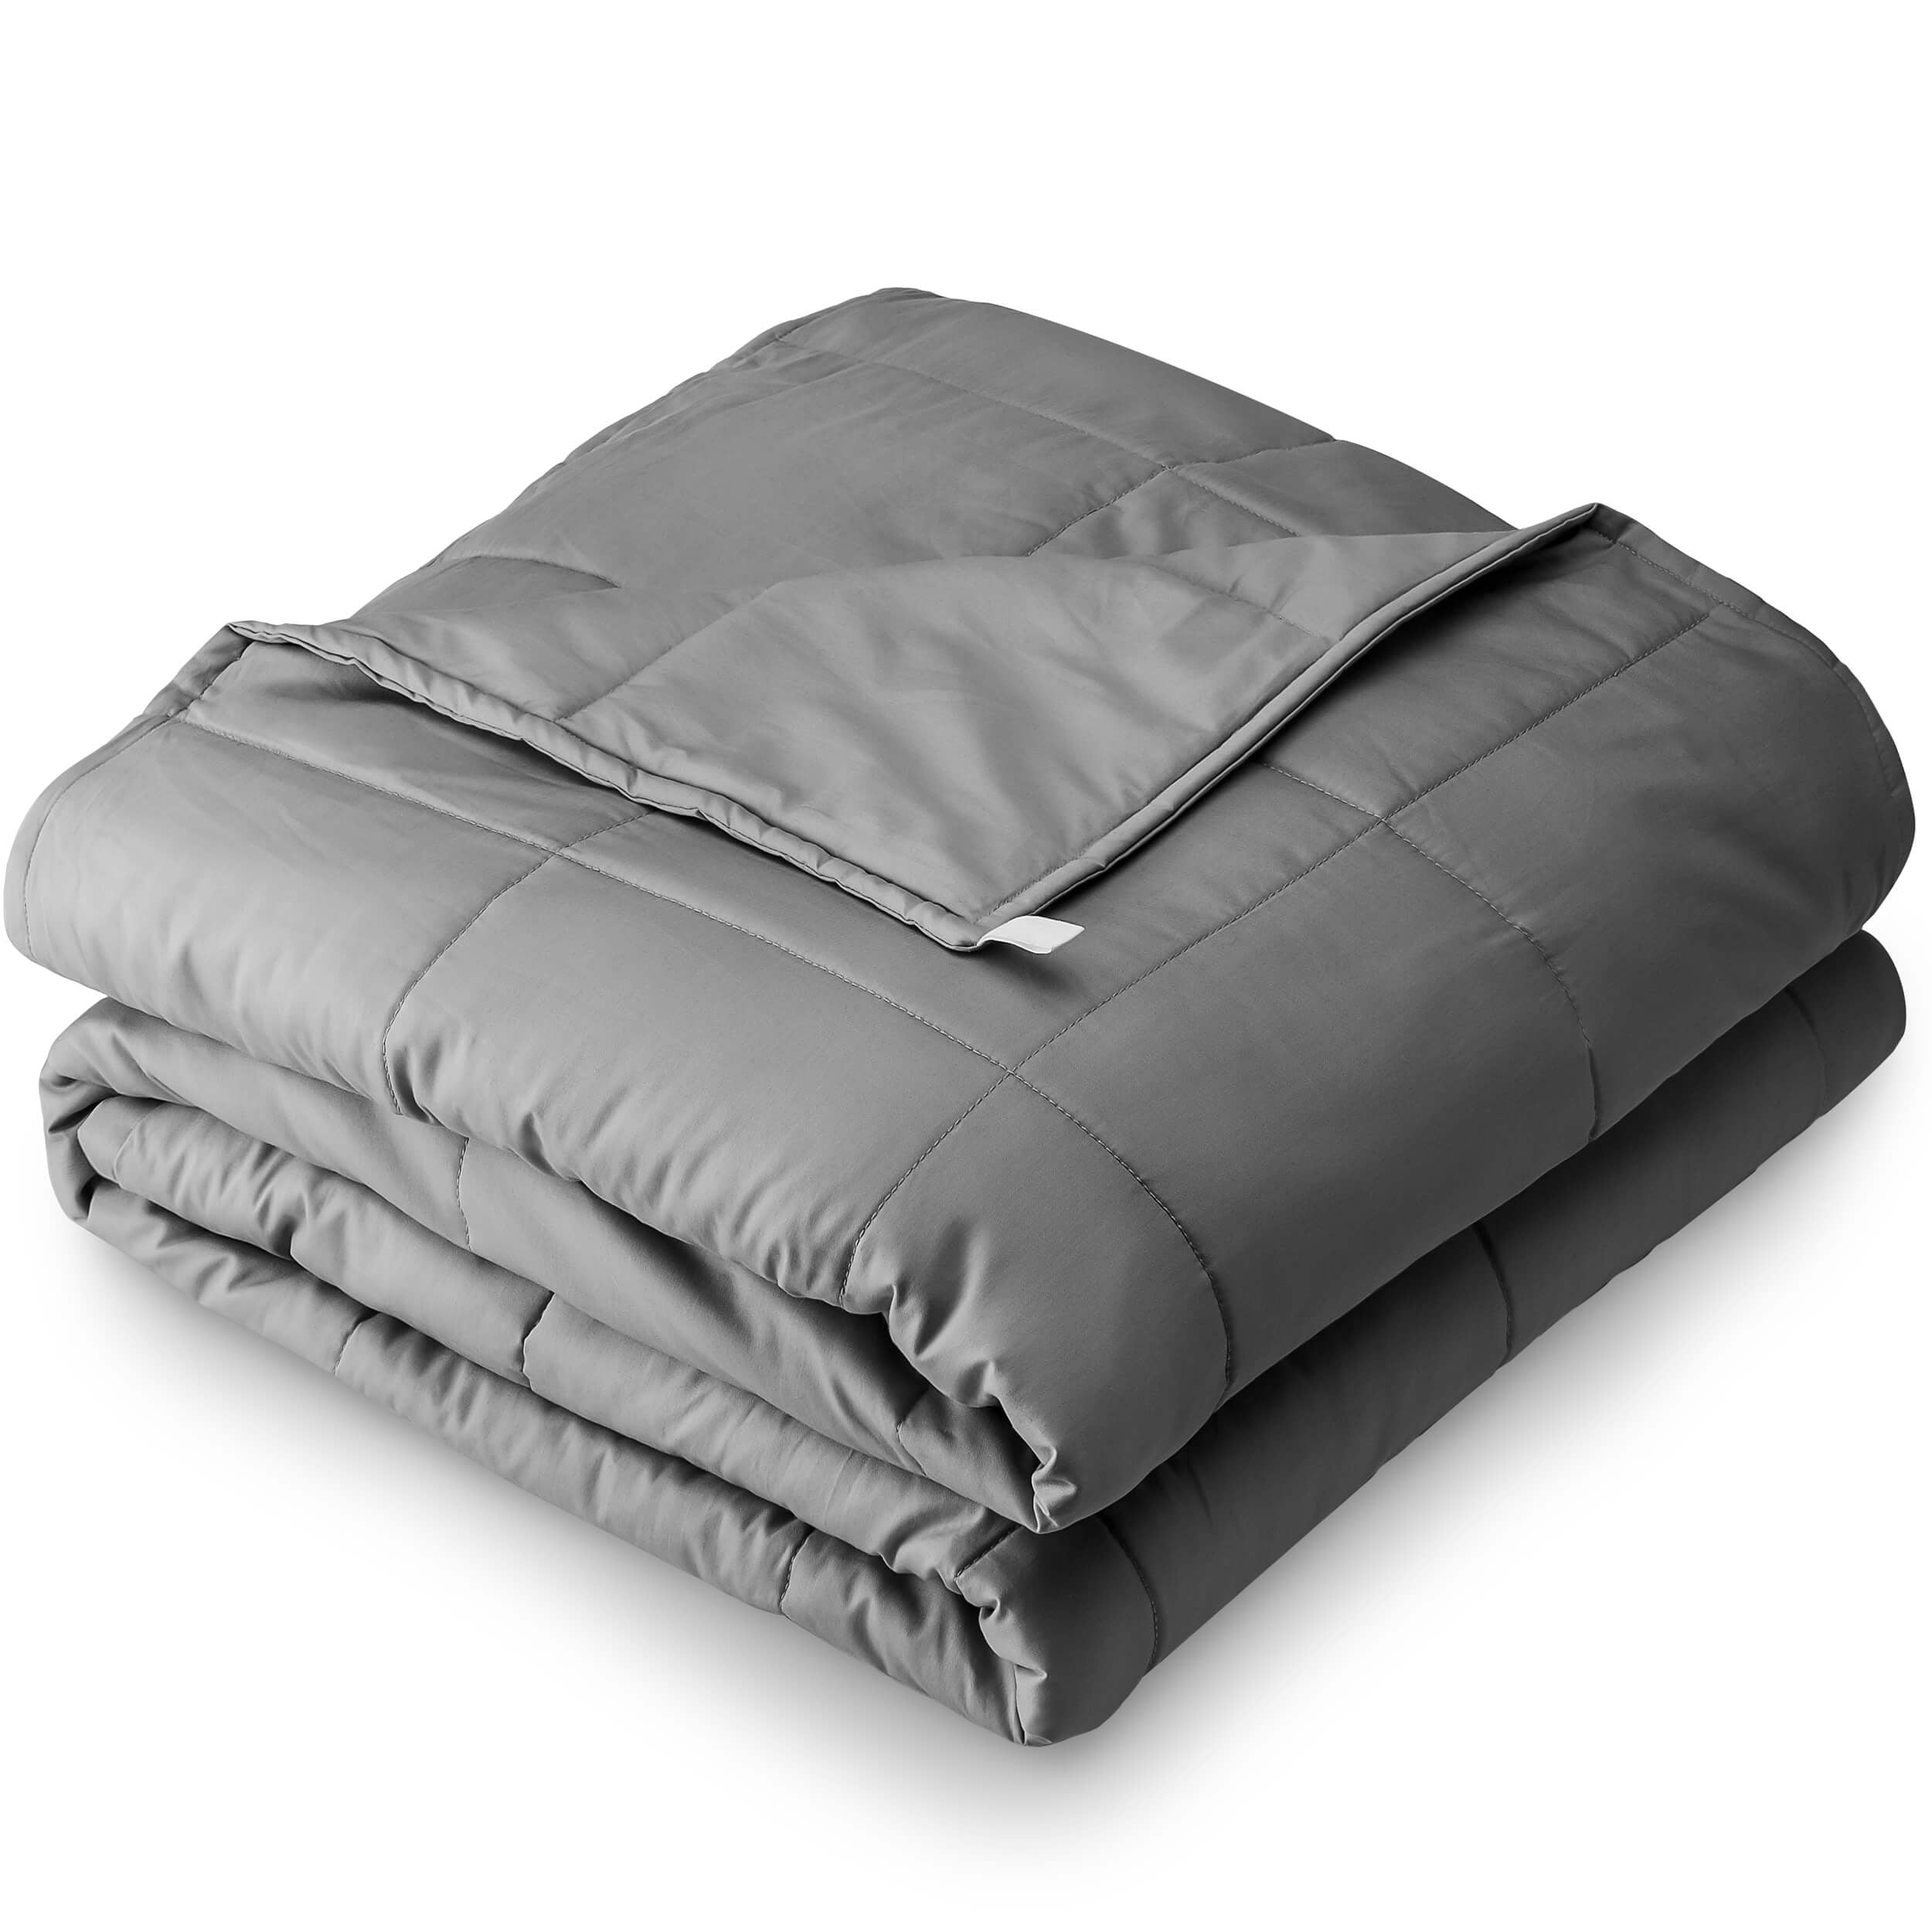 Bare Home Weighted Blanket (40"x60", 10lb, Grey) Youth Size Heavy